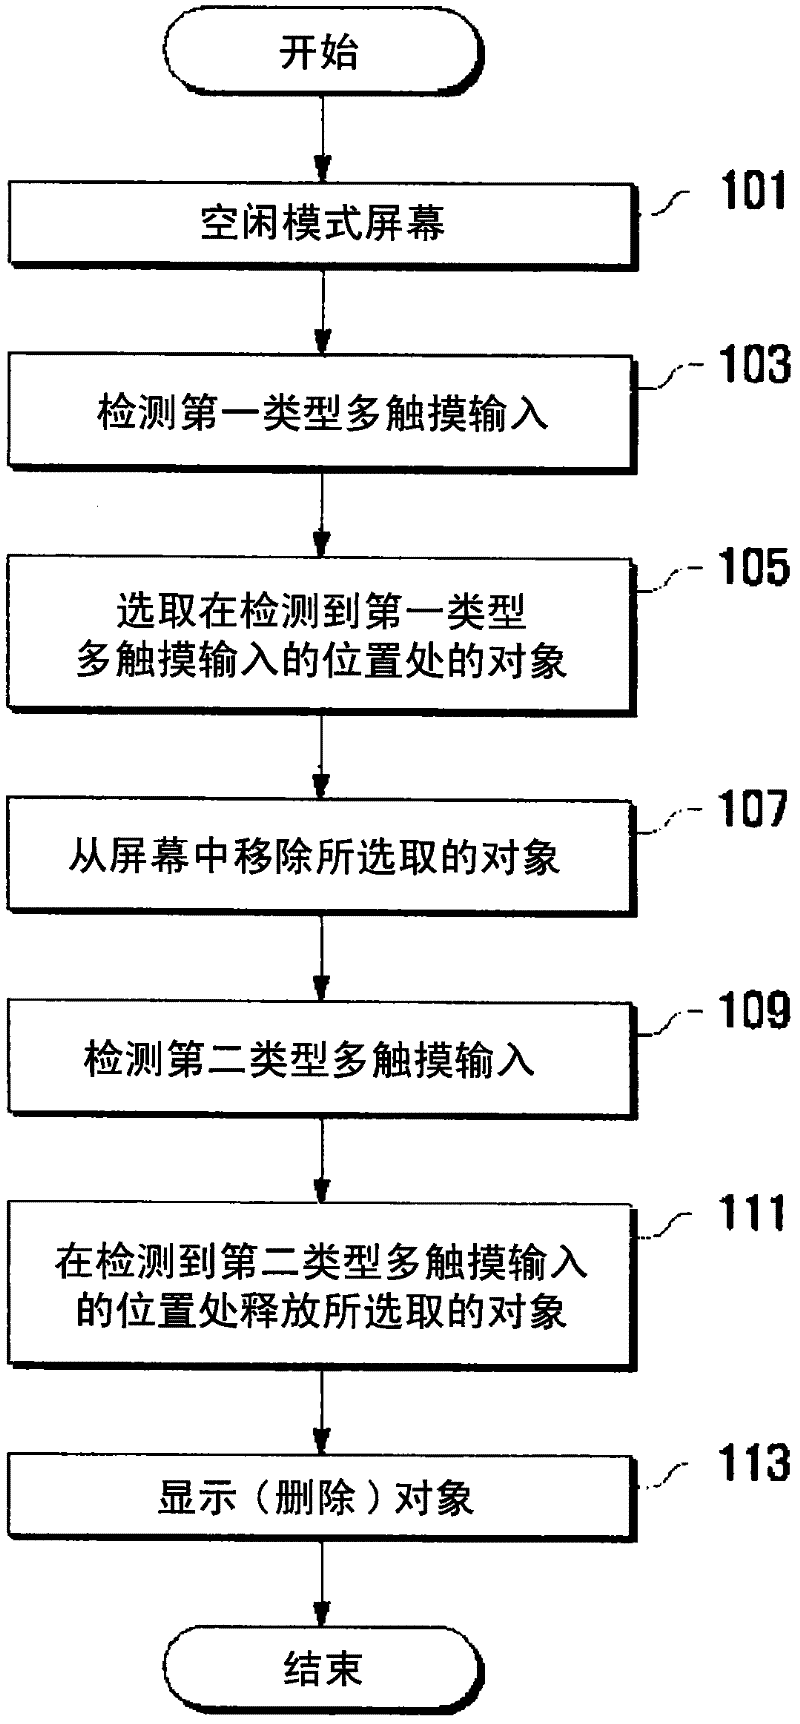 Object management method and apparatus using touchscreen